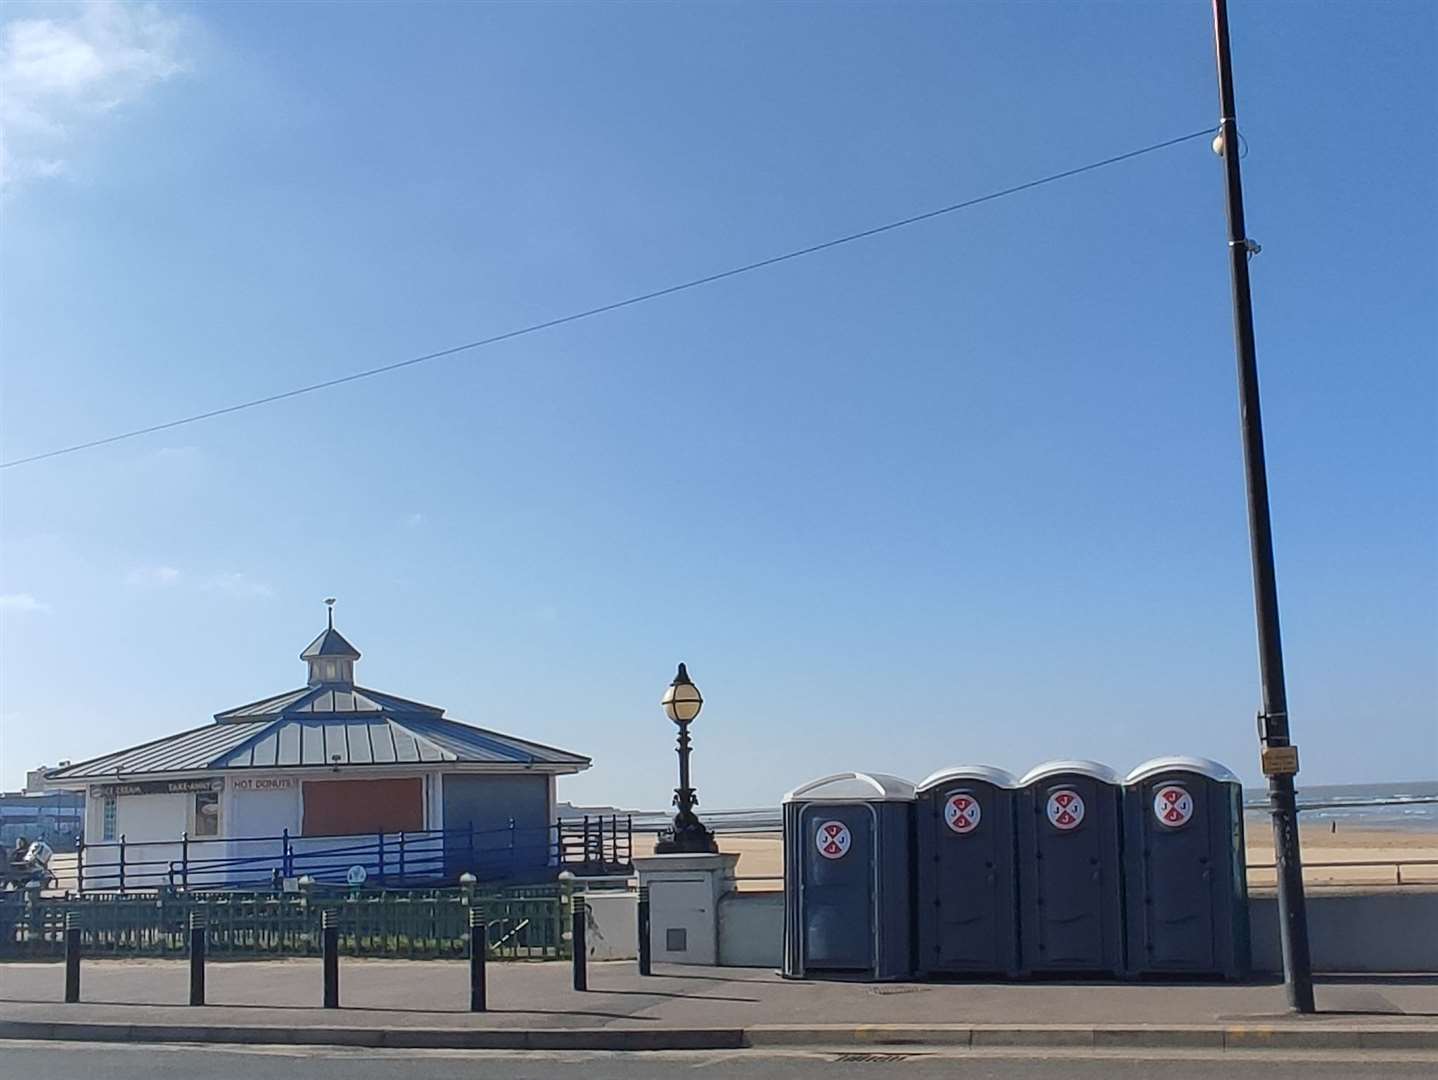 Thanet District Council says the temporary toilets installed in Margate will remain until late September. Picture: Thanet District Council